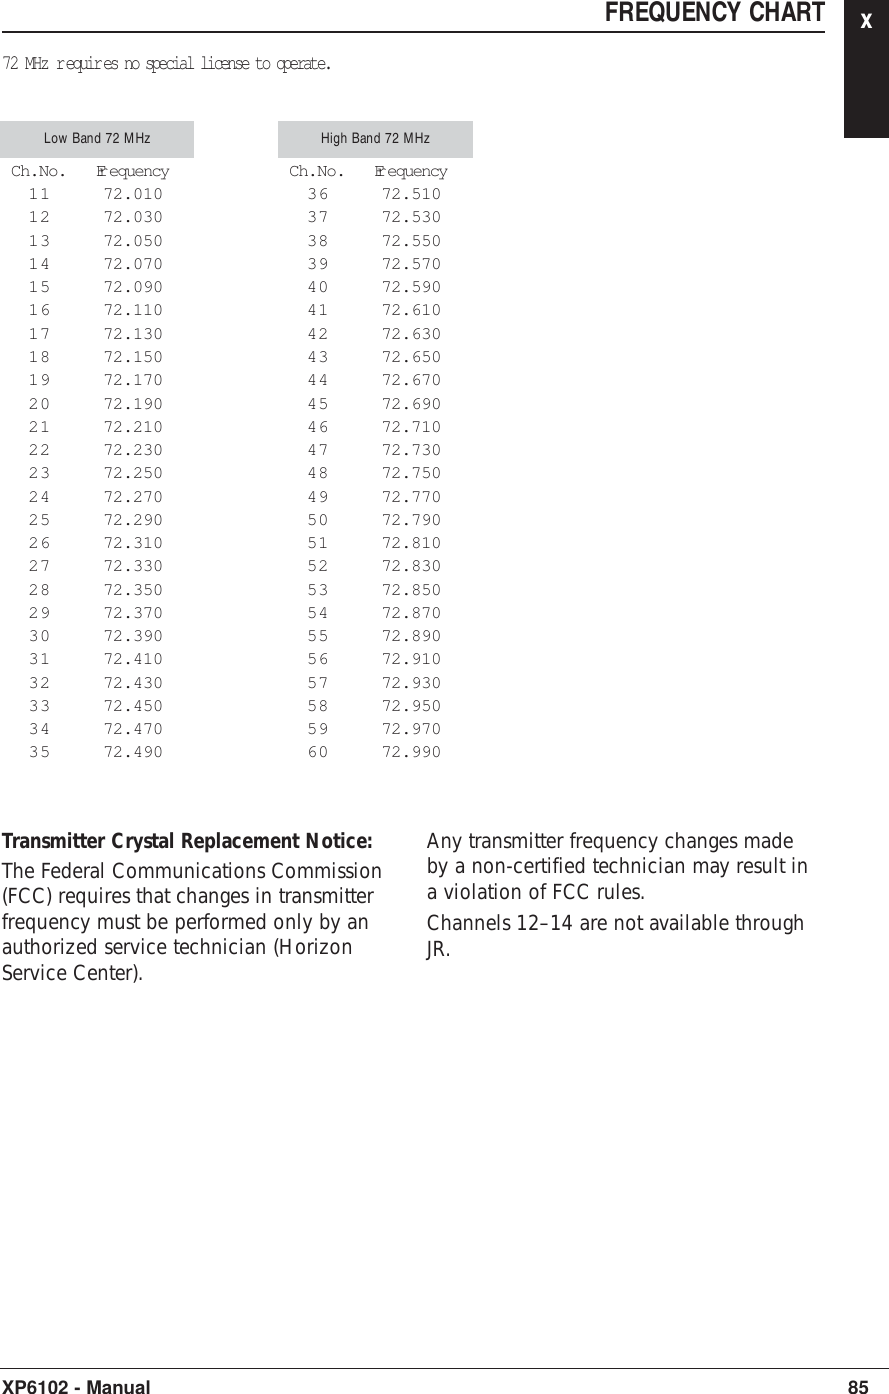 FREQUENCY CHART x72 MHz r equir es no special license to operate.85XP6102 - ManualCh.No. Frequency11 72.01012 72.03013 72.05014 72.07015 72.09016 72.11017 72.13018 72.15019 72.17020 72.19021 72.21022 72.23023 72.25024 72.27025 72.29026 72.31027 72.33028 72.35029 72.37030 72.39031 72.41032 72.43033 72.45034 72.47035 72.490Low Band 72 MHzCh.No. Frequency36 72.51037 72.53038 72.55039 72.57040 72.59041 72.61042 72.63043 72.65044 72.67045 72.69046 72.71047 72.73048 72.75049 72.77050 72.79051 72.81052 72.83053 72.85054 72.87055 72.89056 72.91057 72.93058 72.95059 72.97060 72.990High Band 72 MHzTransmitter Crystal Replacement Notice:The Federal Communications Commission(FCC) requires that changes in transmitterfrequency must be performed only by anauthorized service technician (HorizonService Center).Any transmitter frequency changes madeby a non-certified technician may result ina violation of FCC rules.Channels 12–14 are not available throughJR.